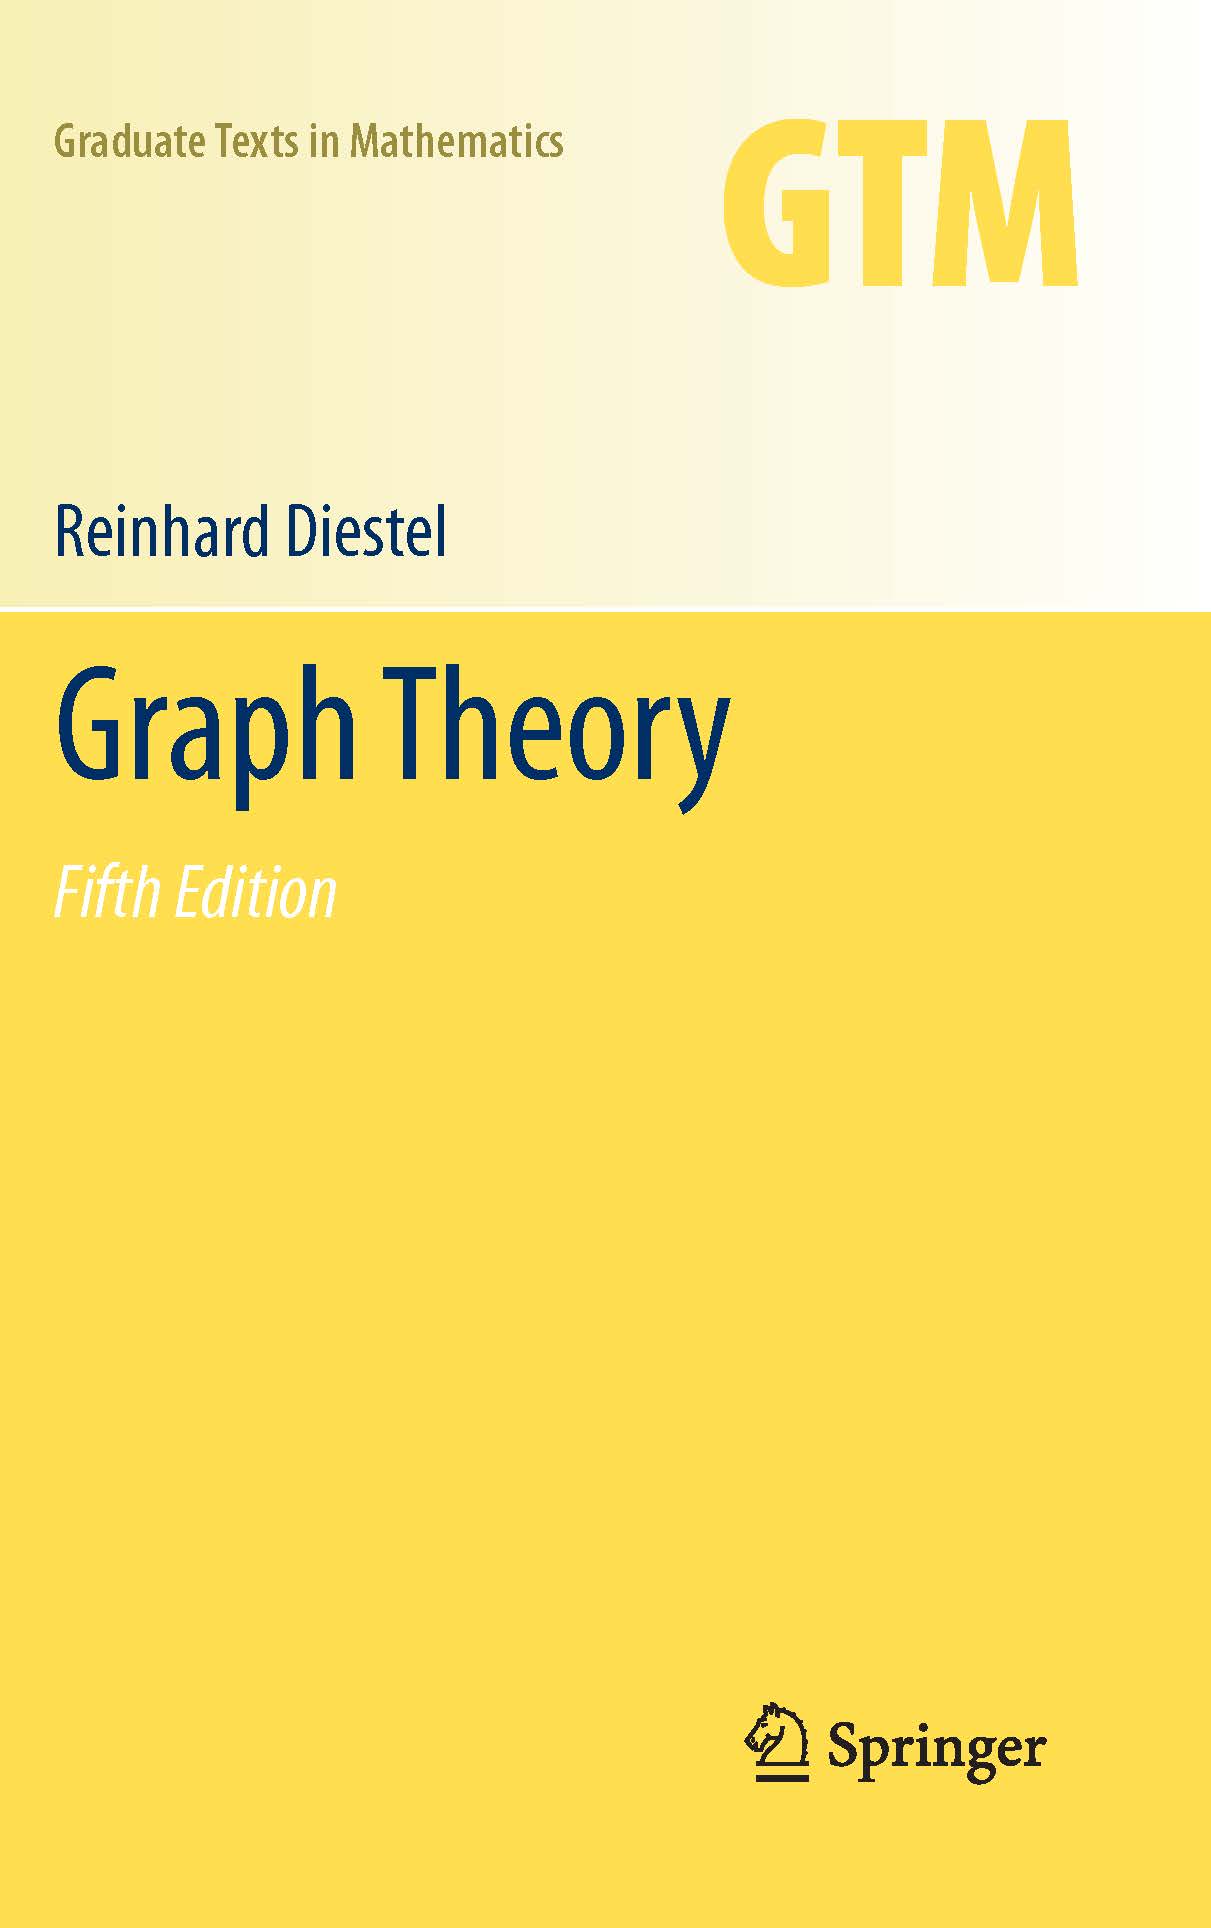 Graph Theory, 5th Edition [Free Preview]